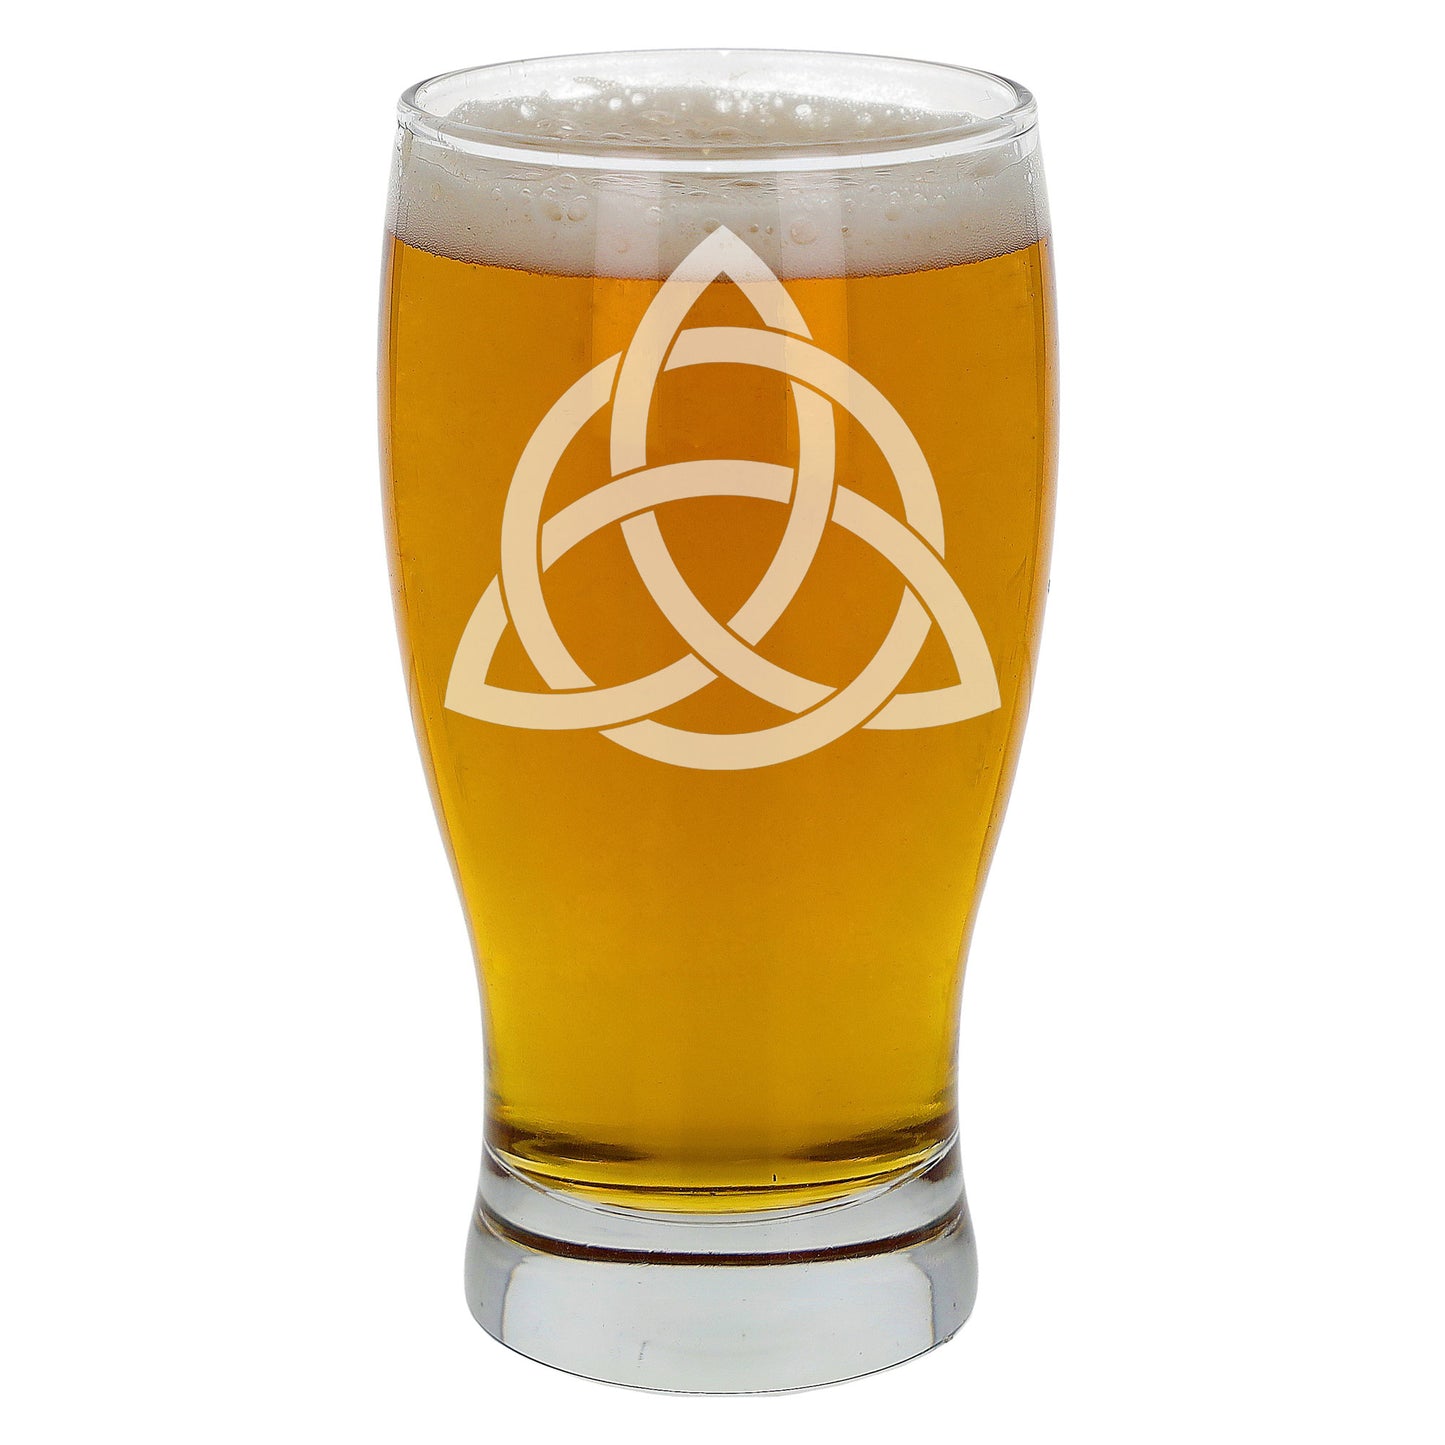 Celtic Knot Engraved Beer Pint Glass and/or Coaster Set  - Always Looking Good - Beer Glass Only  